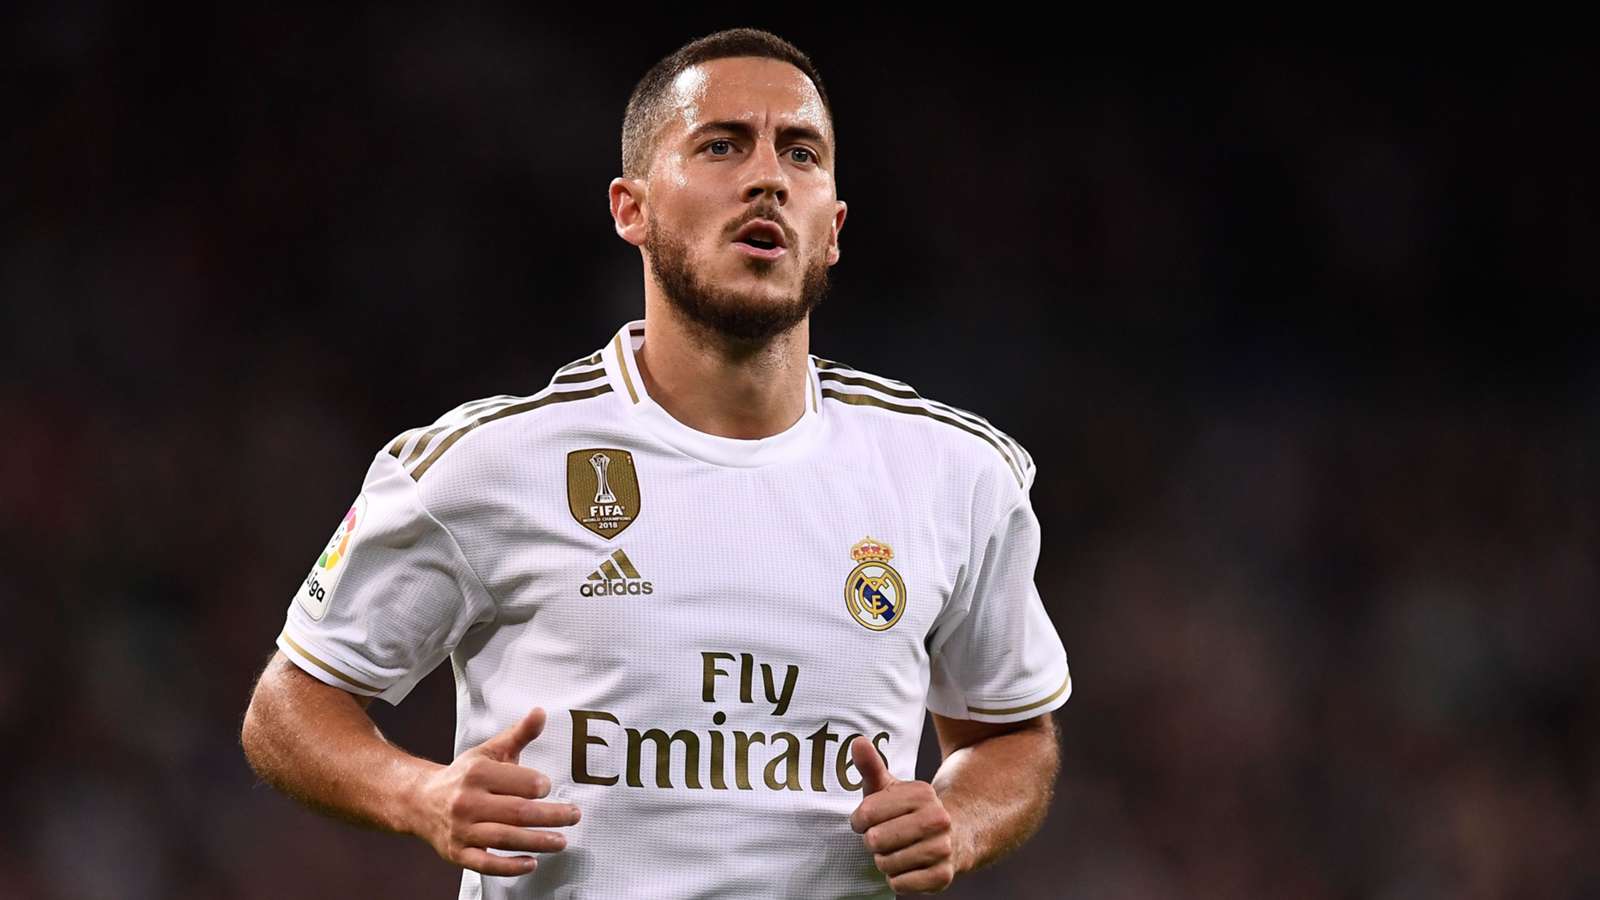 'He became too heavy' - Hazard's Real Madrid struggles down to weight issues, says Wenger - Bóng Đá